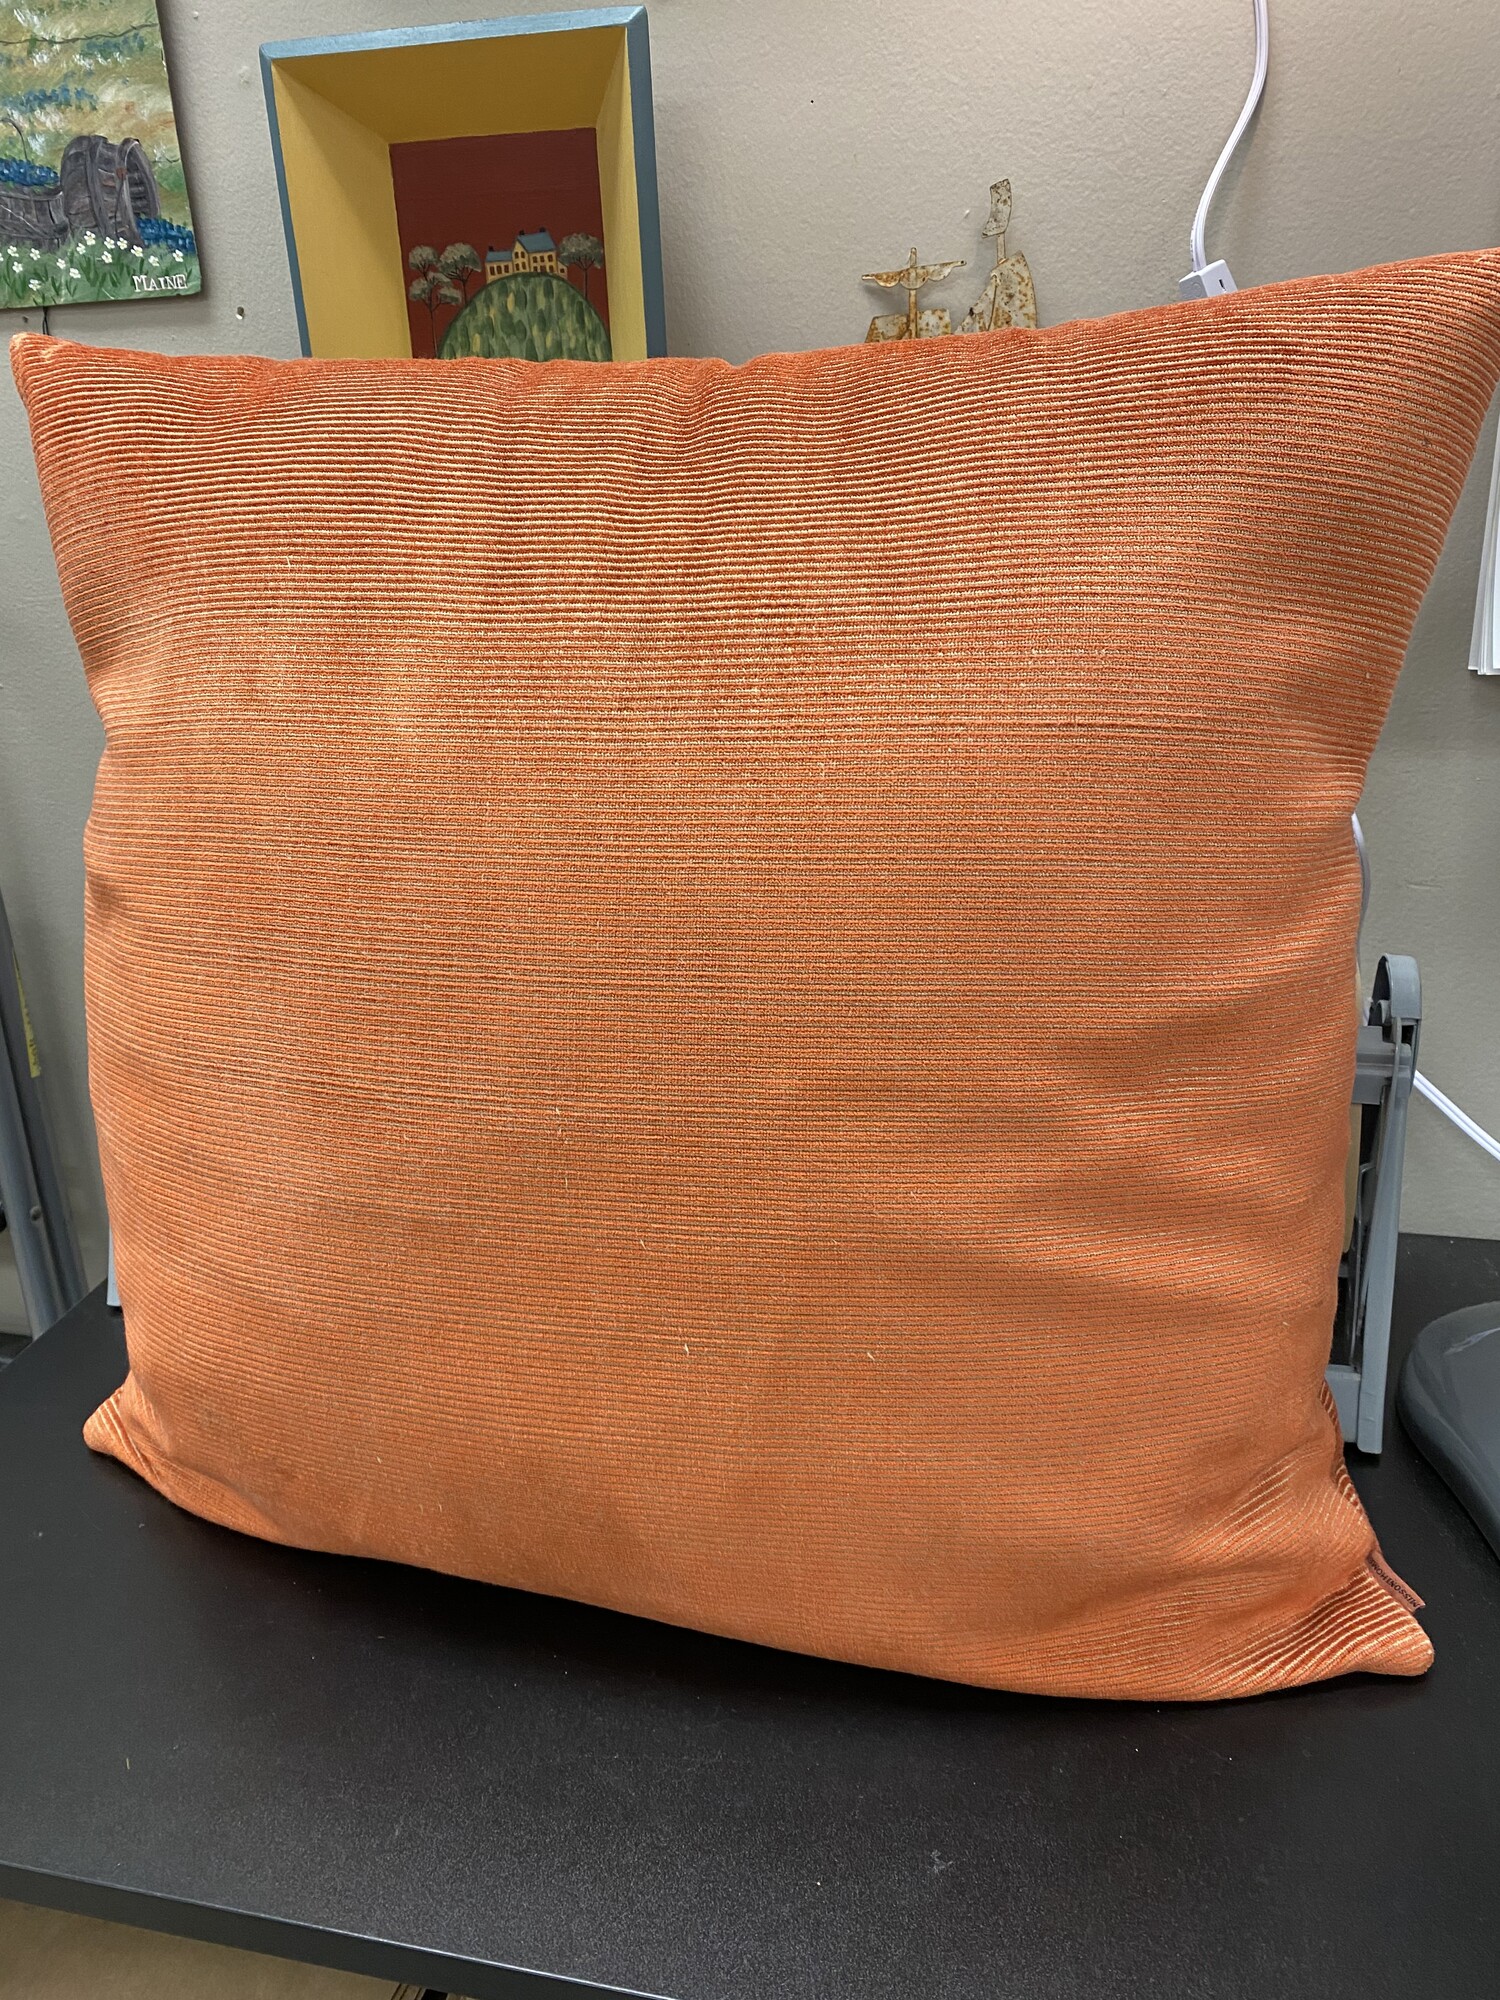 Missoni Home Pillow, Rust, Size: 22x22 Inch